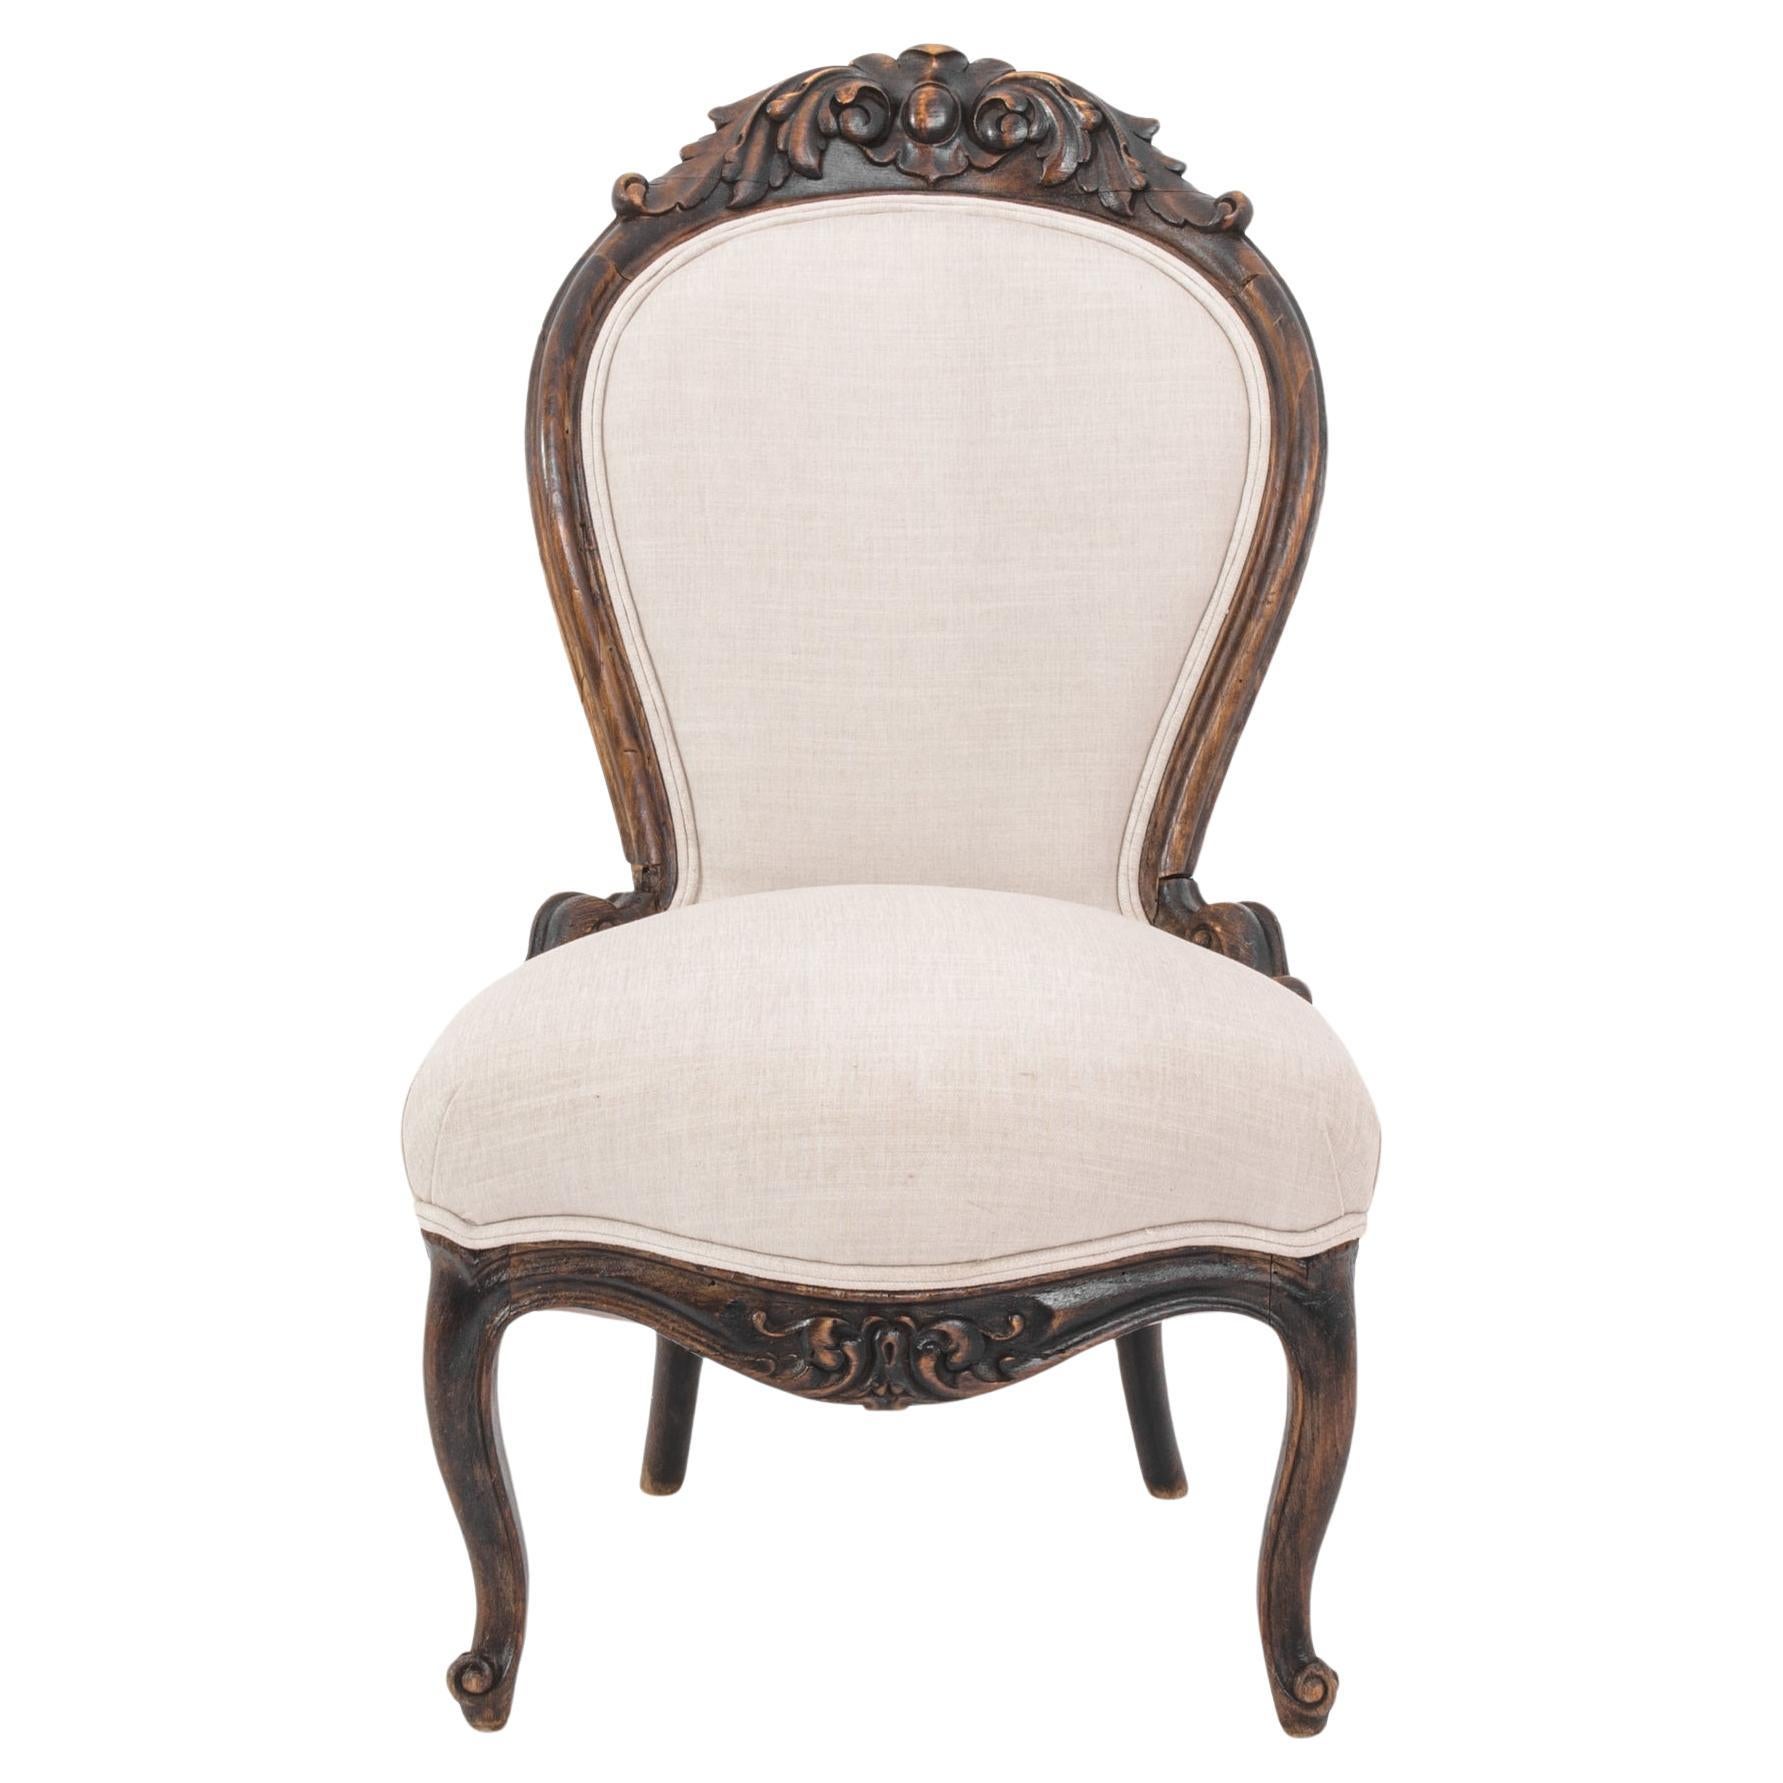 1880s French Wooden Chair with Upholstered Seat and Back For Sale